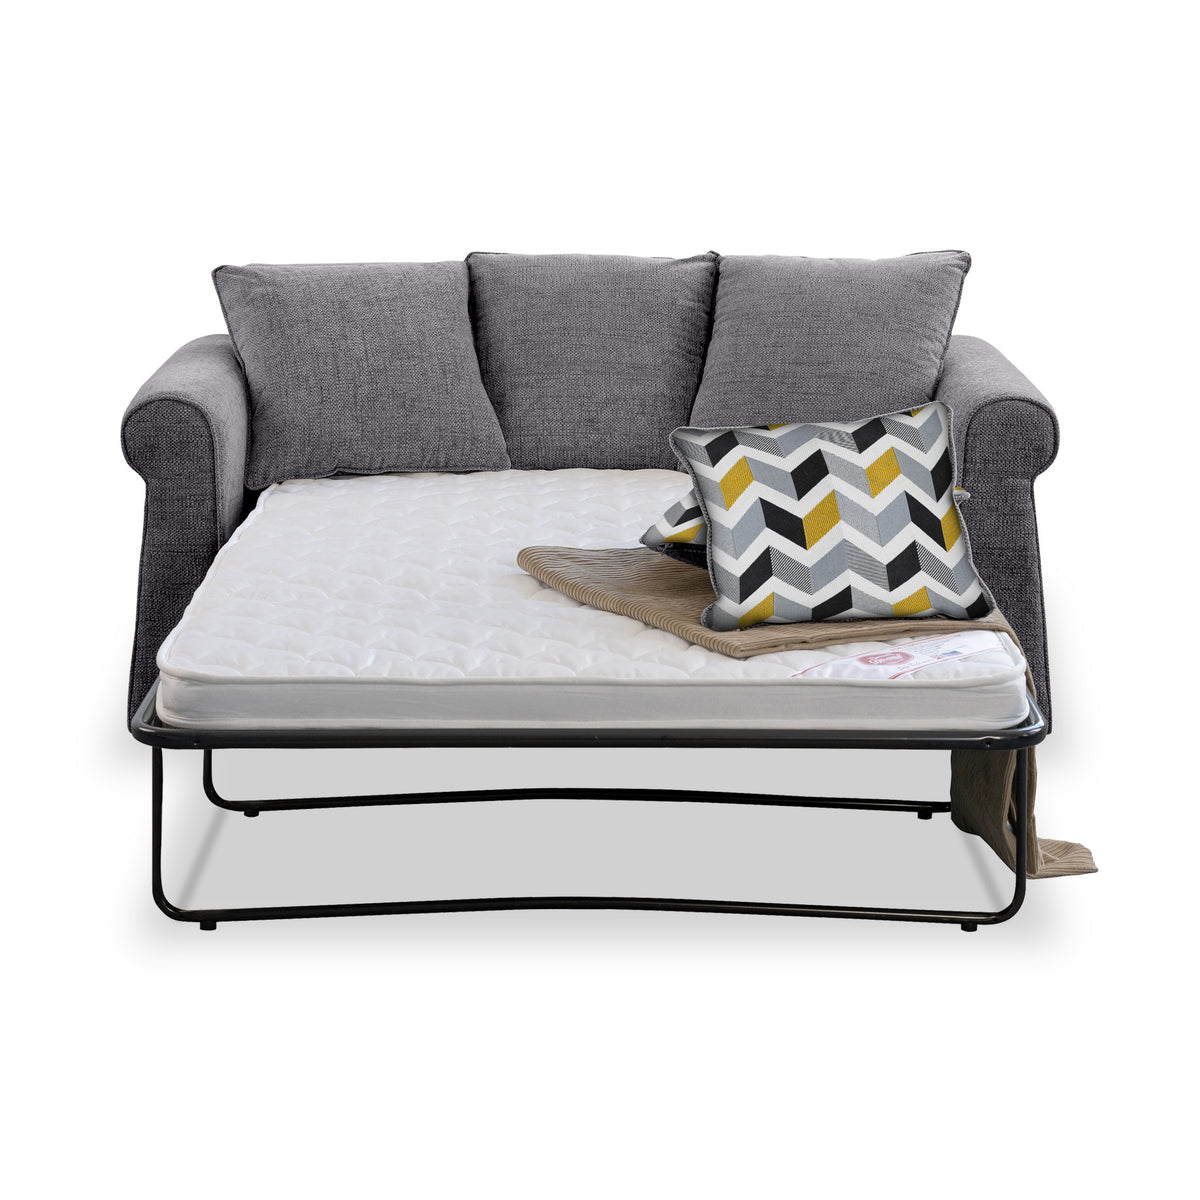 Branston Charcoal Soft Weave 2 Seater Sofabed with Mustard Scatter Cushions from Roseland Furniture